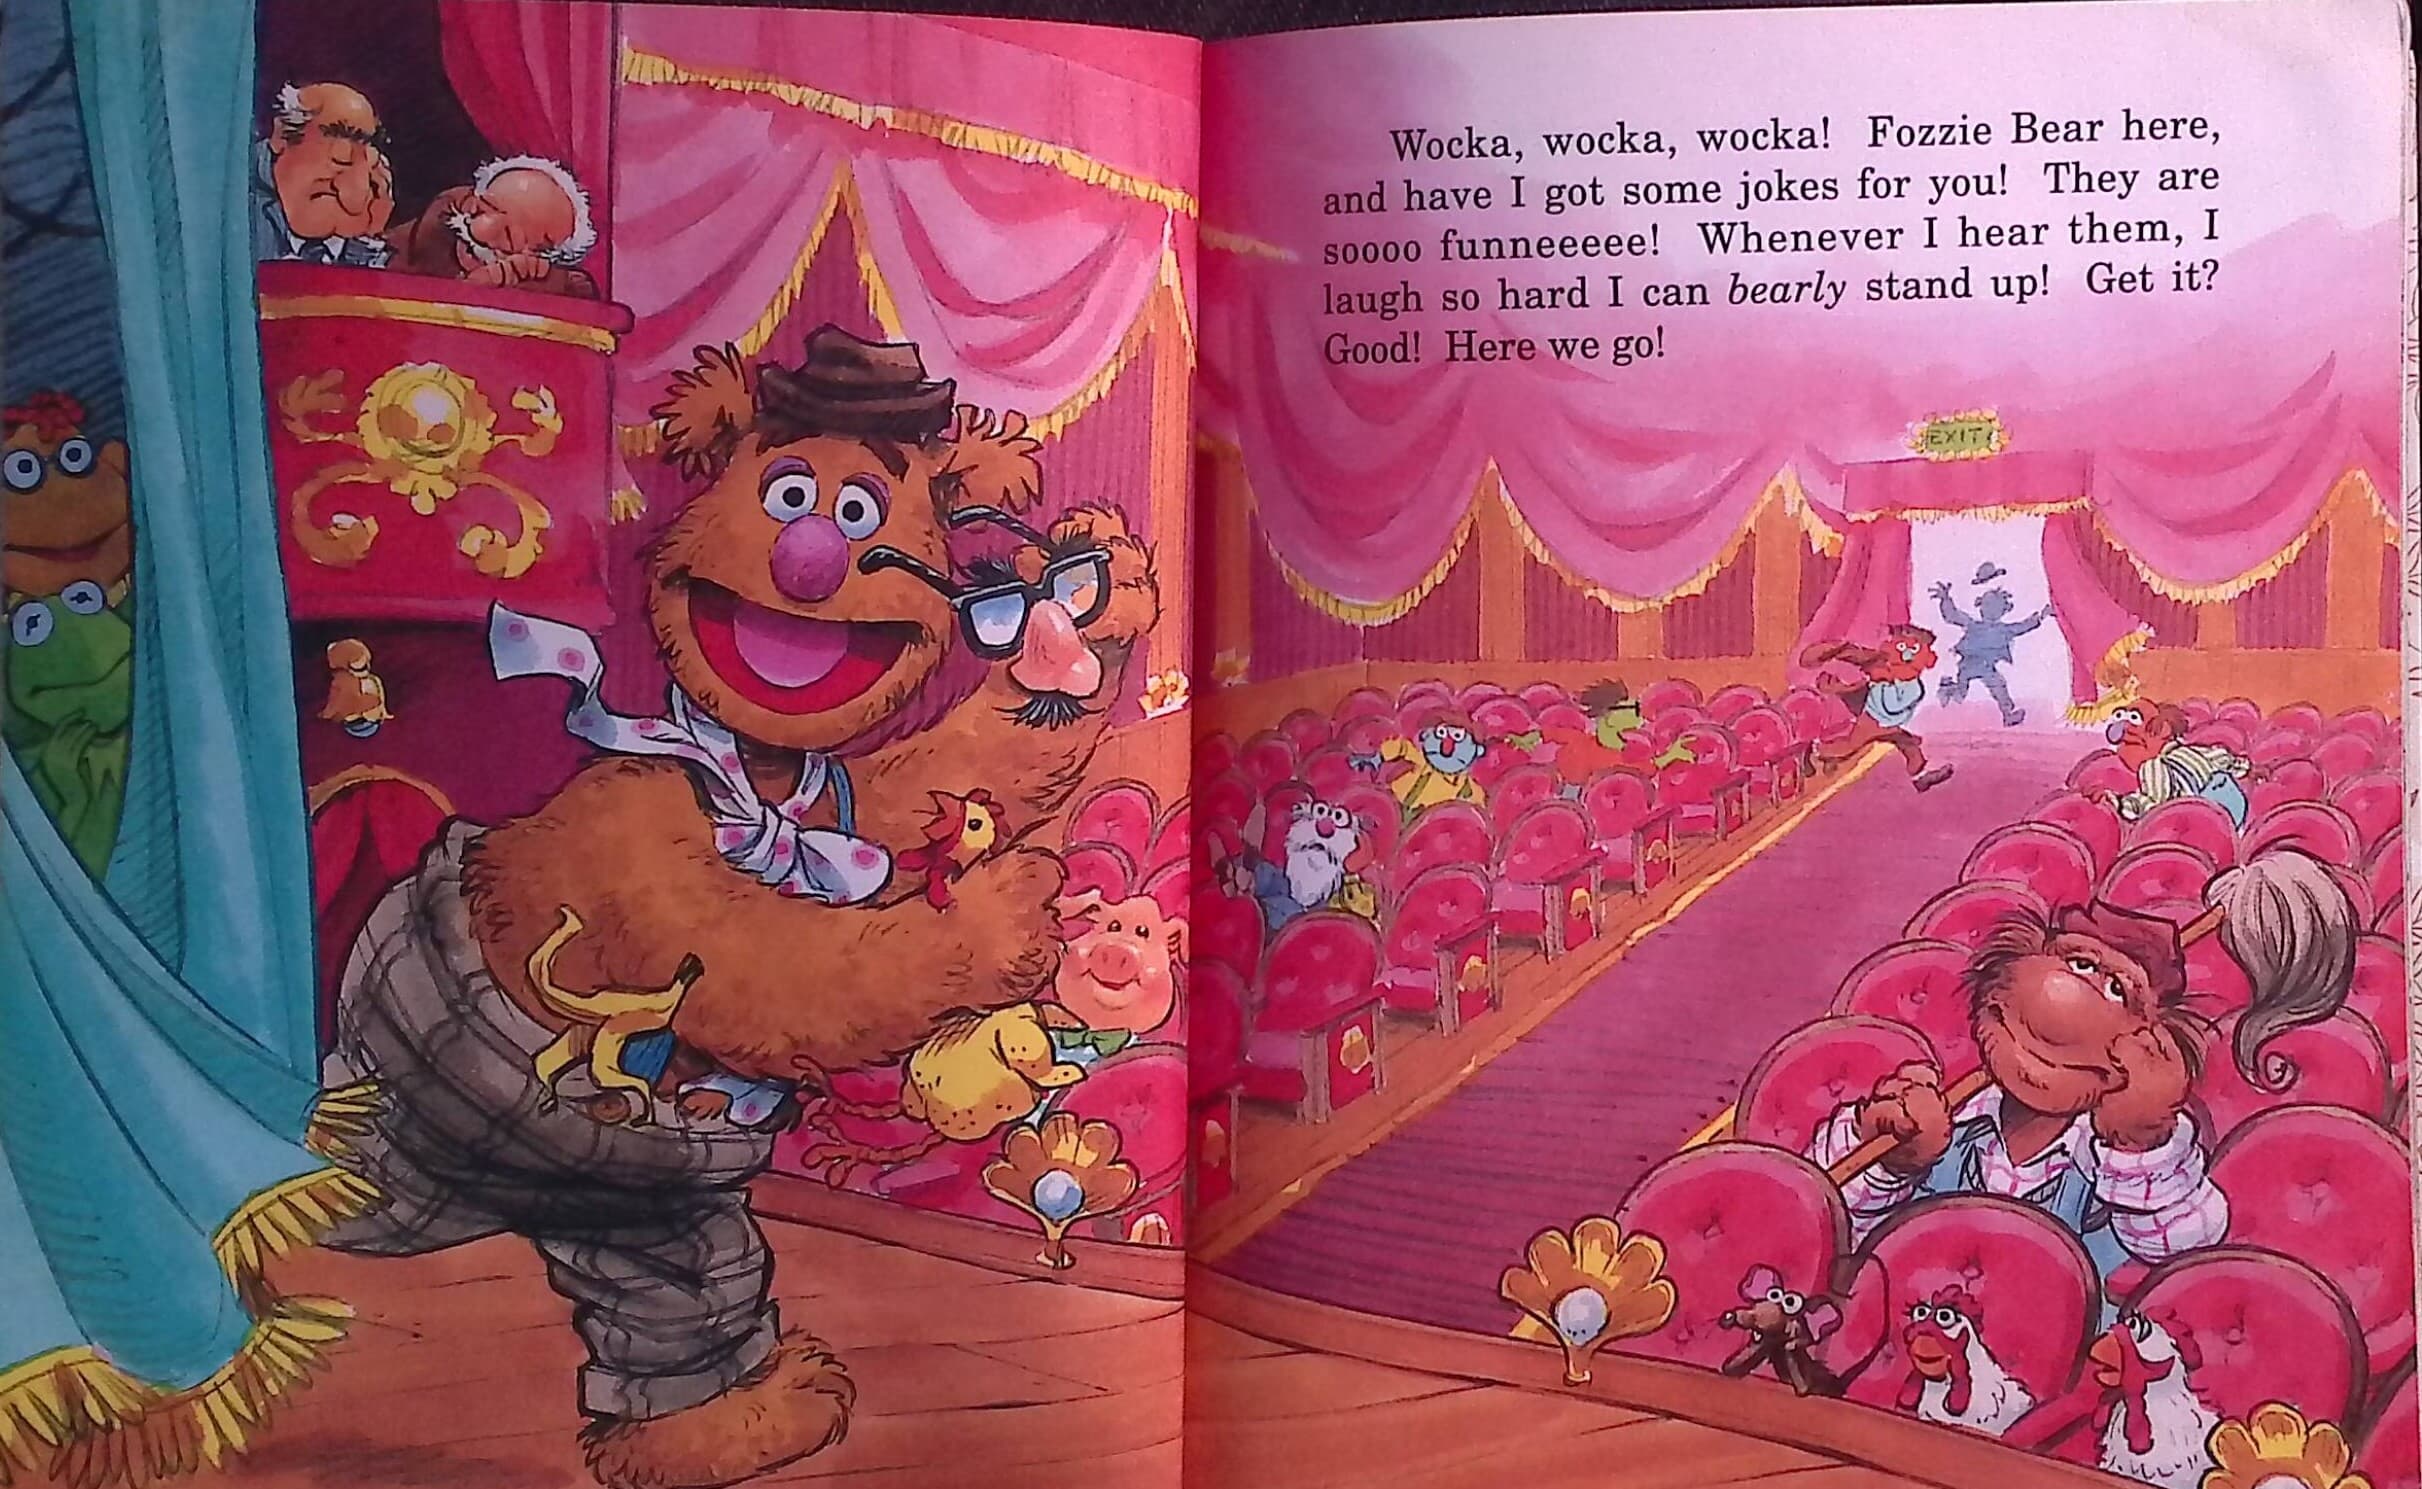 Fozzie's Funnies: A Book of Silly Jokes and Riddles (A Little Golden Book) Hardcover